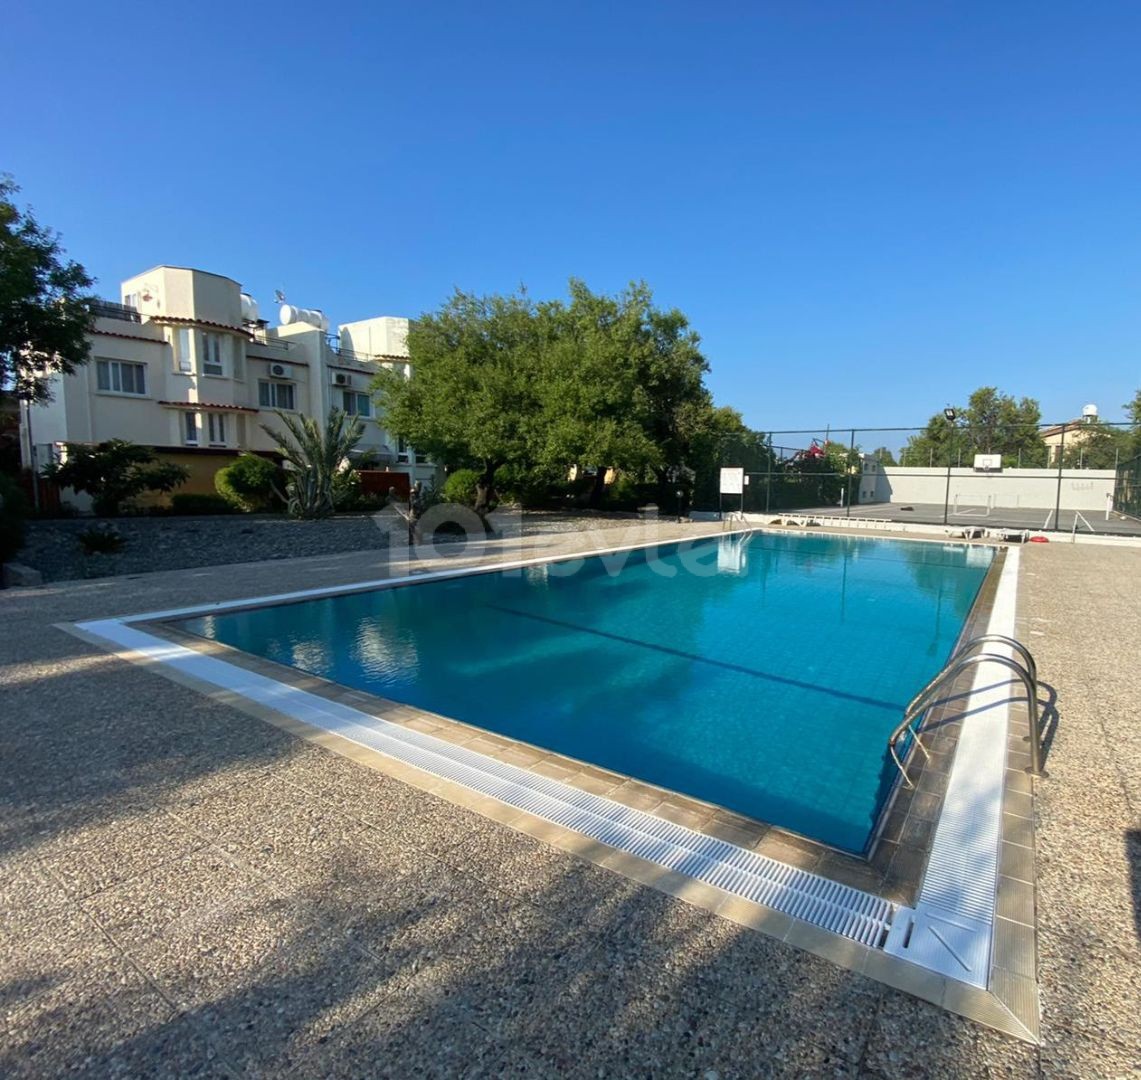 Daily rental villa in Kyrenia 3+1 with pool, tennis and basketball court, 200 meters from the sea.